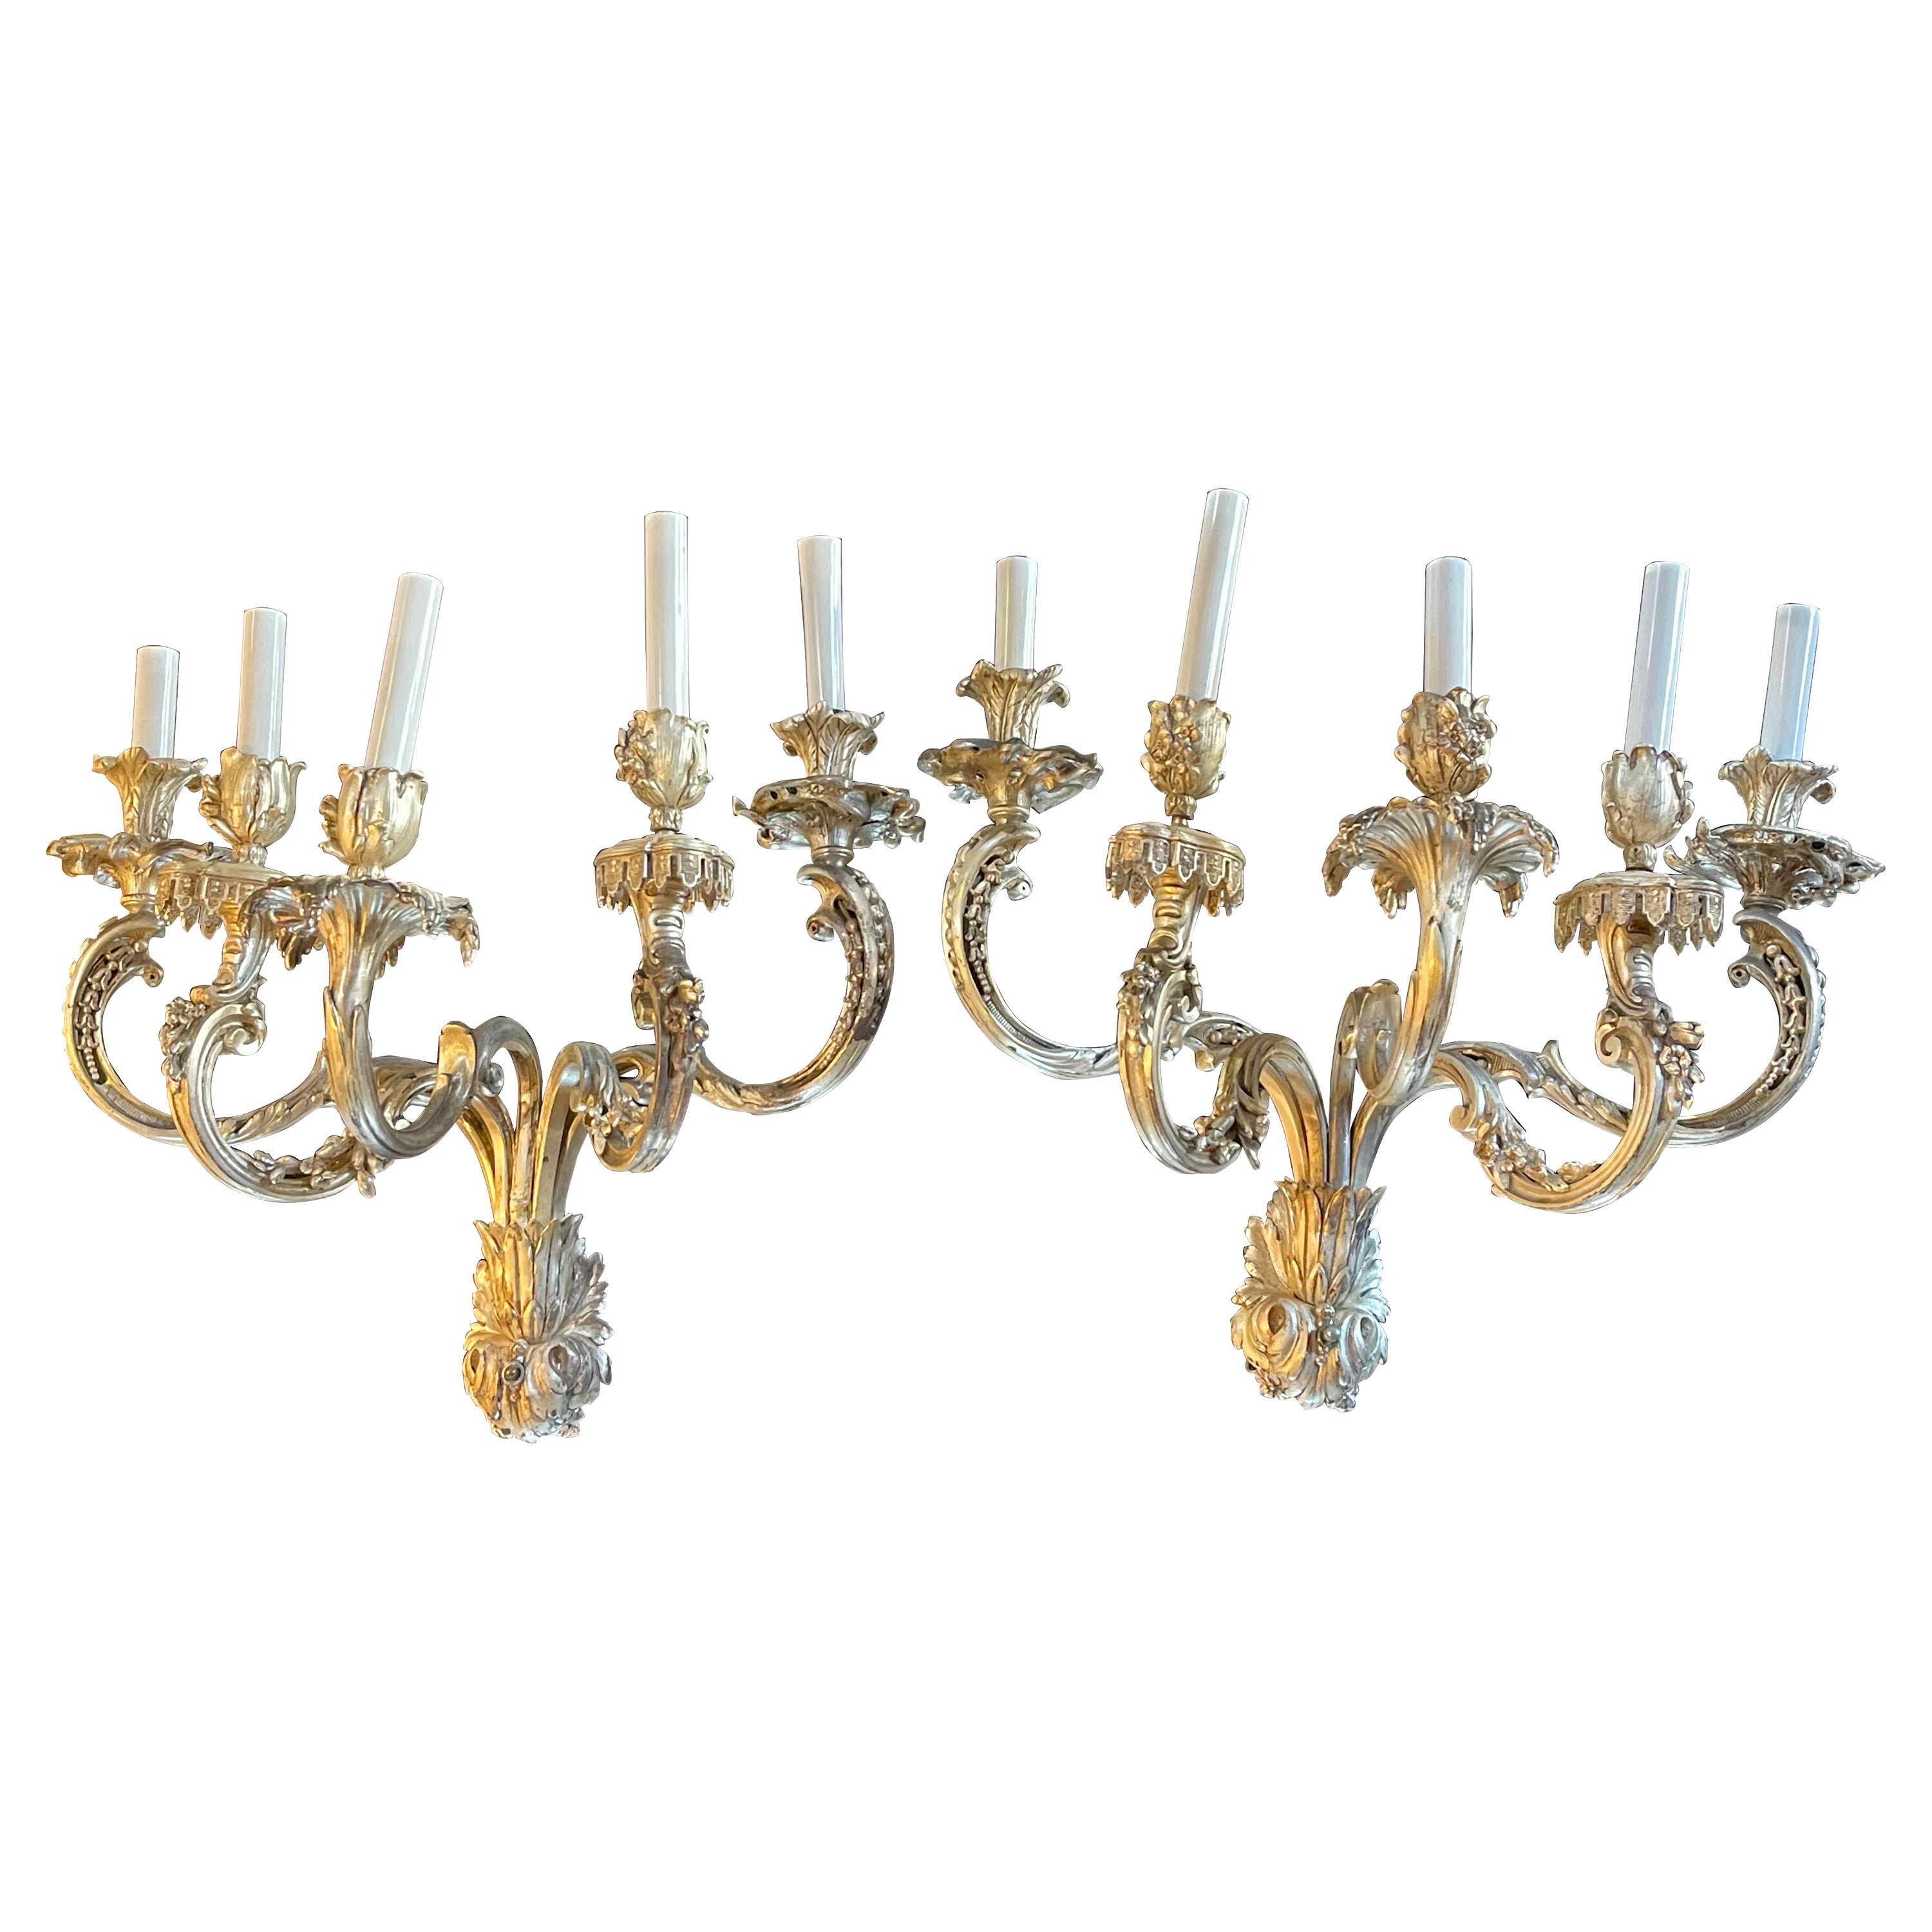 A Pair of 5 Arm Silver Wall Sconces